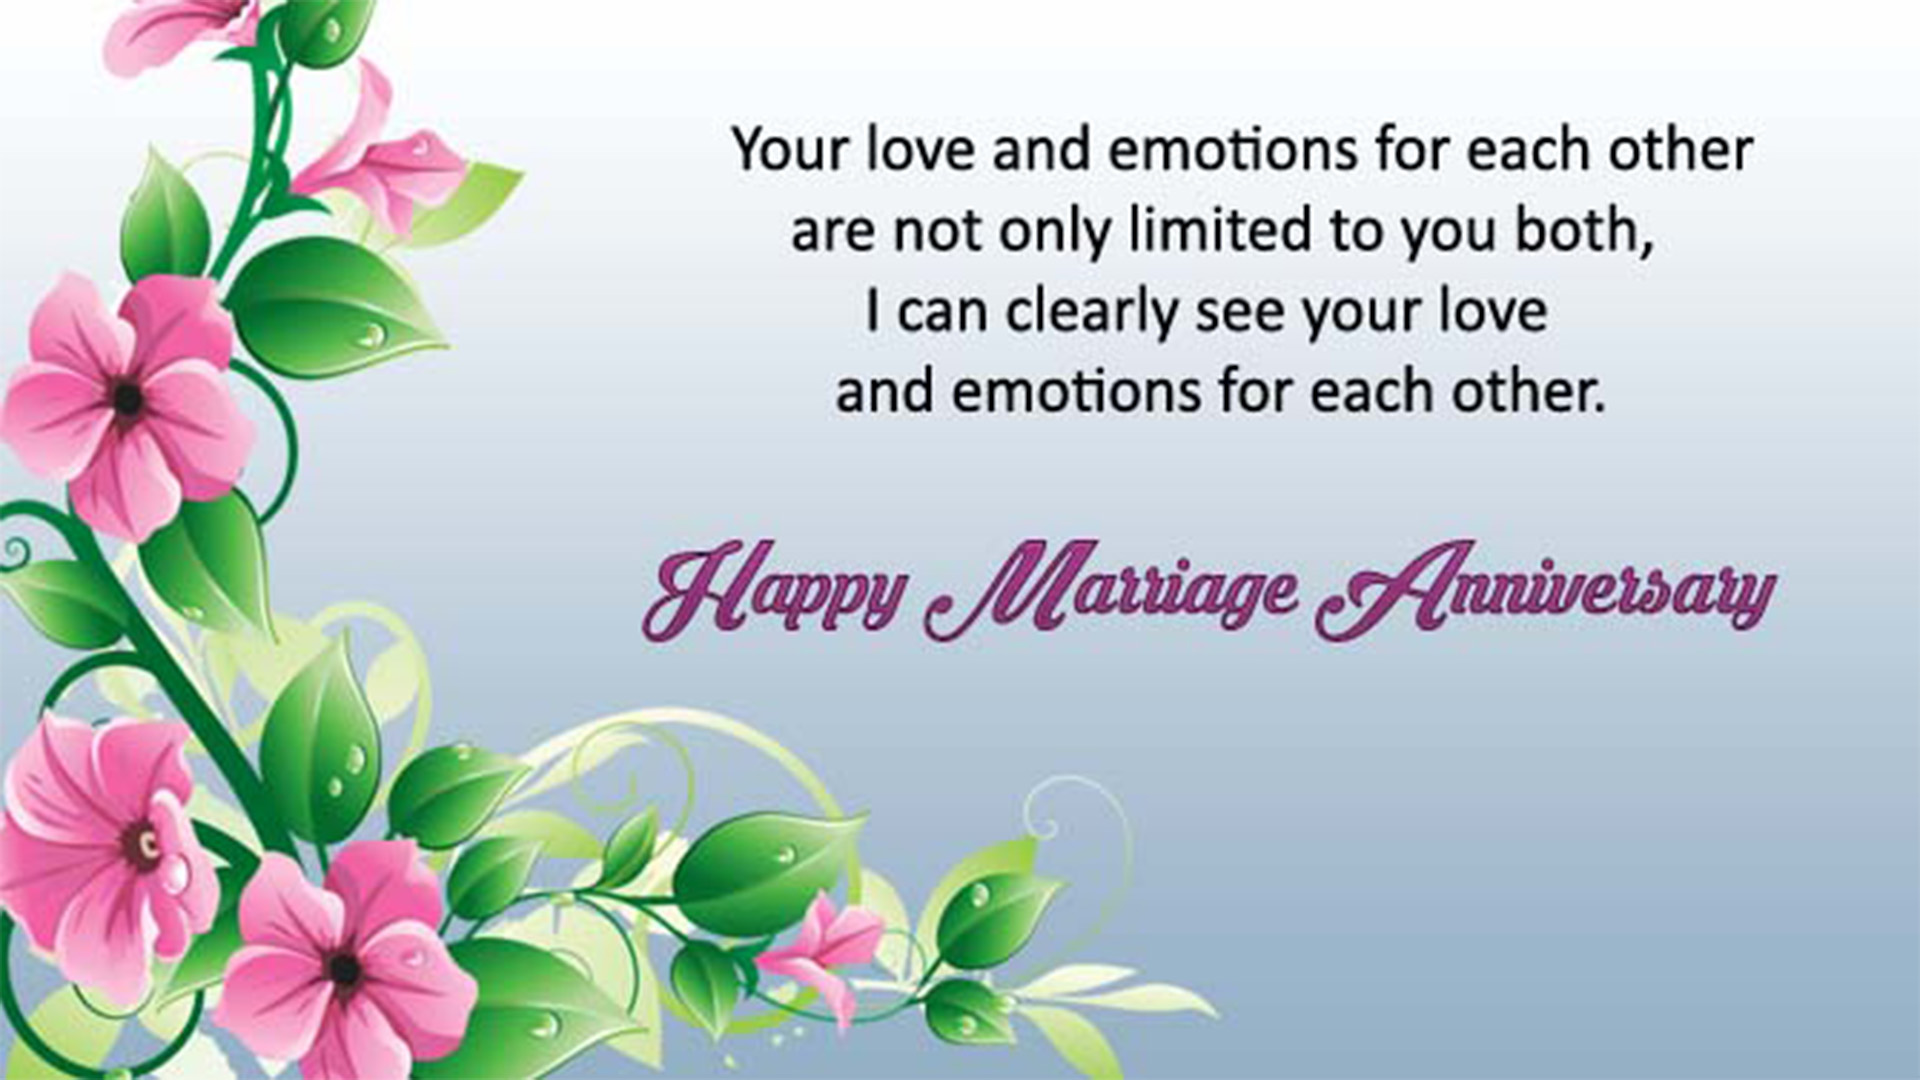 happy marriage anniversary wishes picture